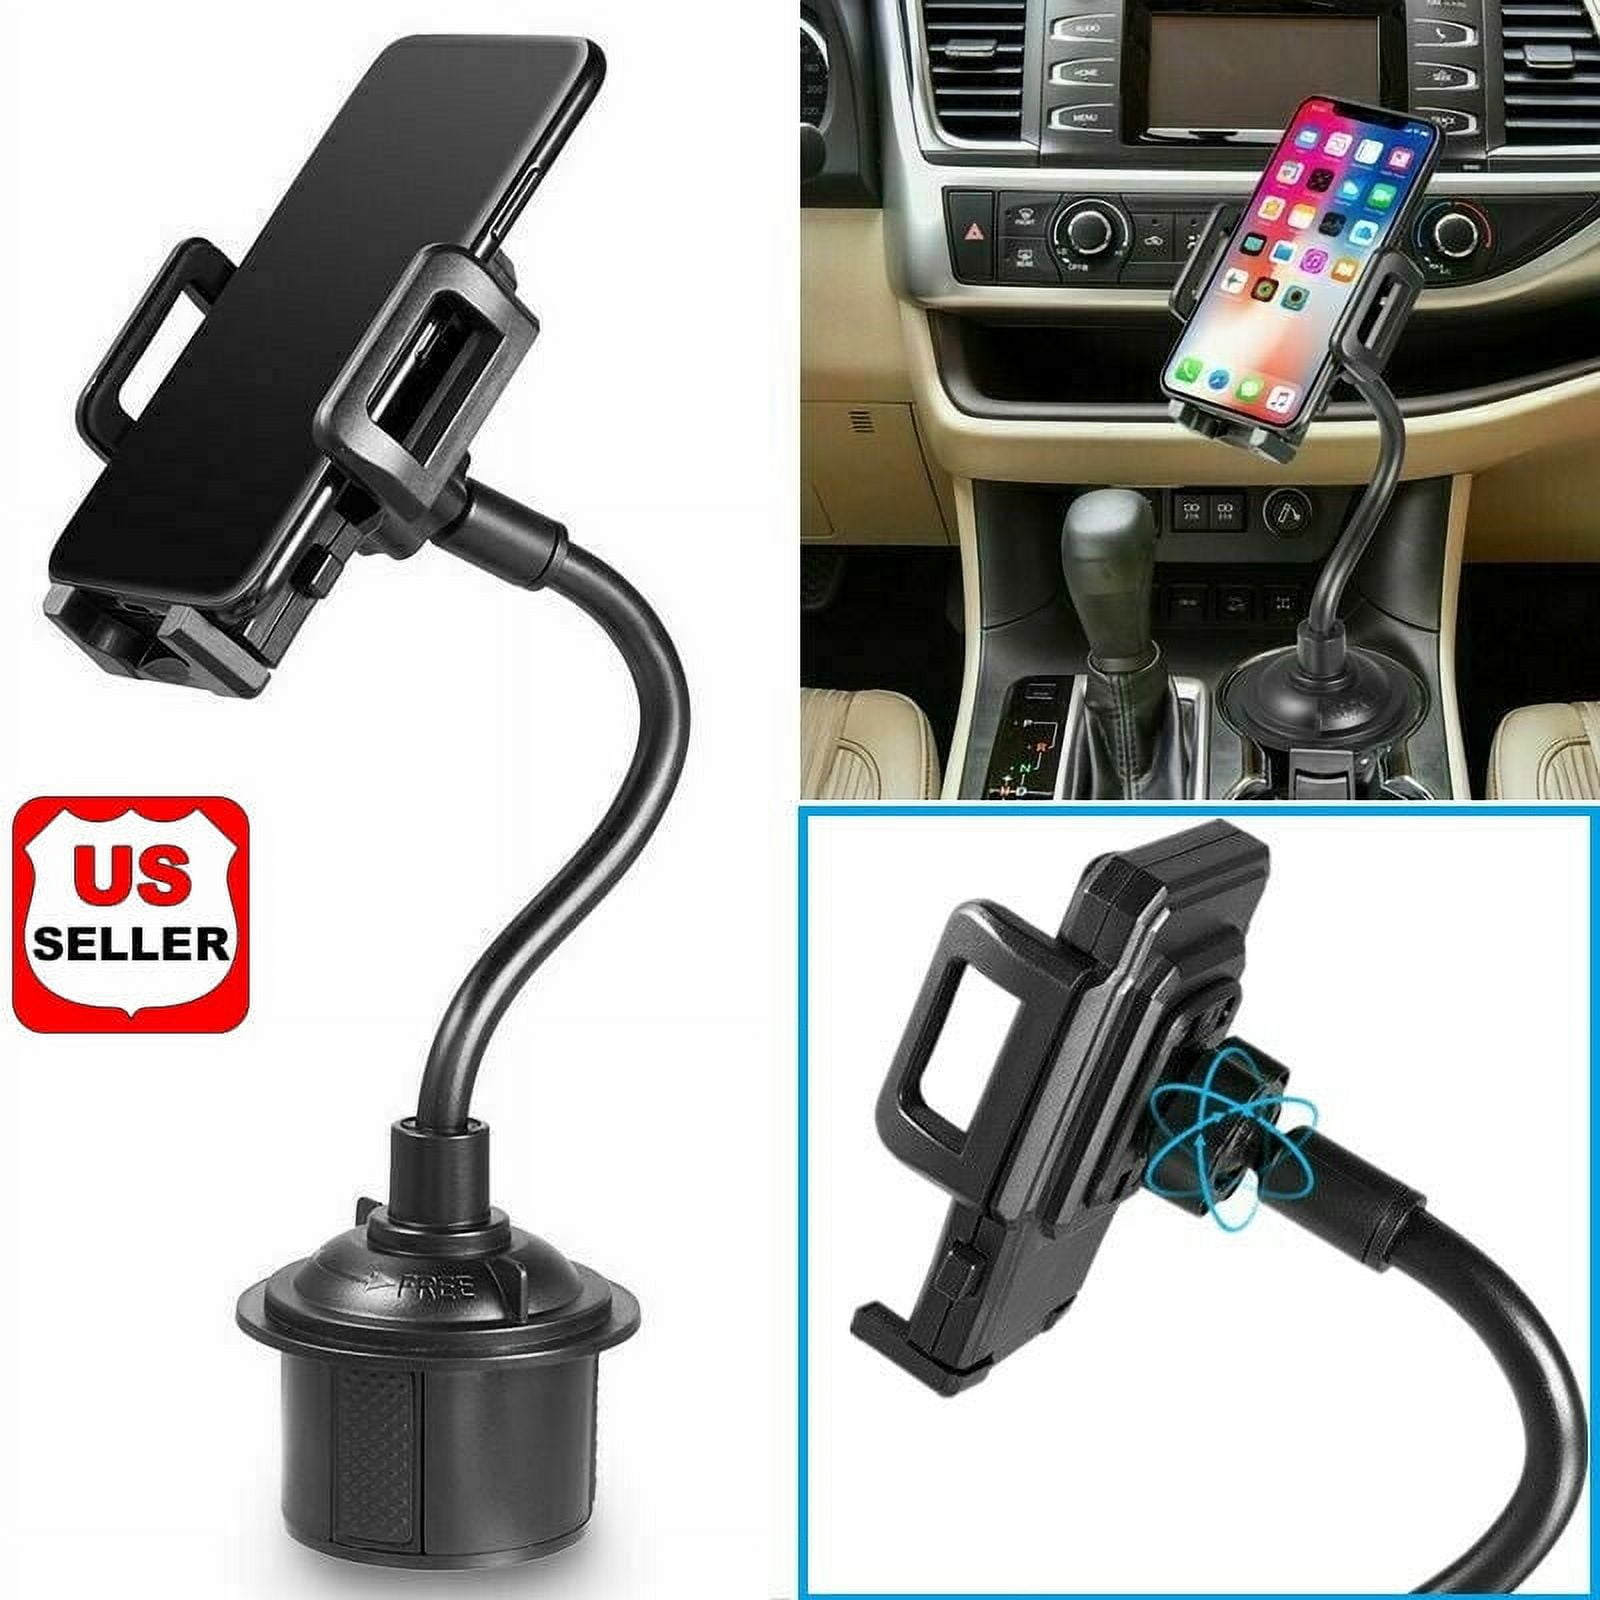 New Universal Car Mount Adjustable Gooseneck Cup Holder Cradle for Cell  Phone US 